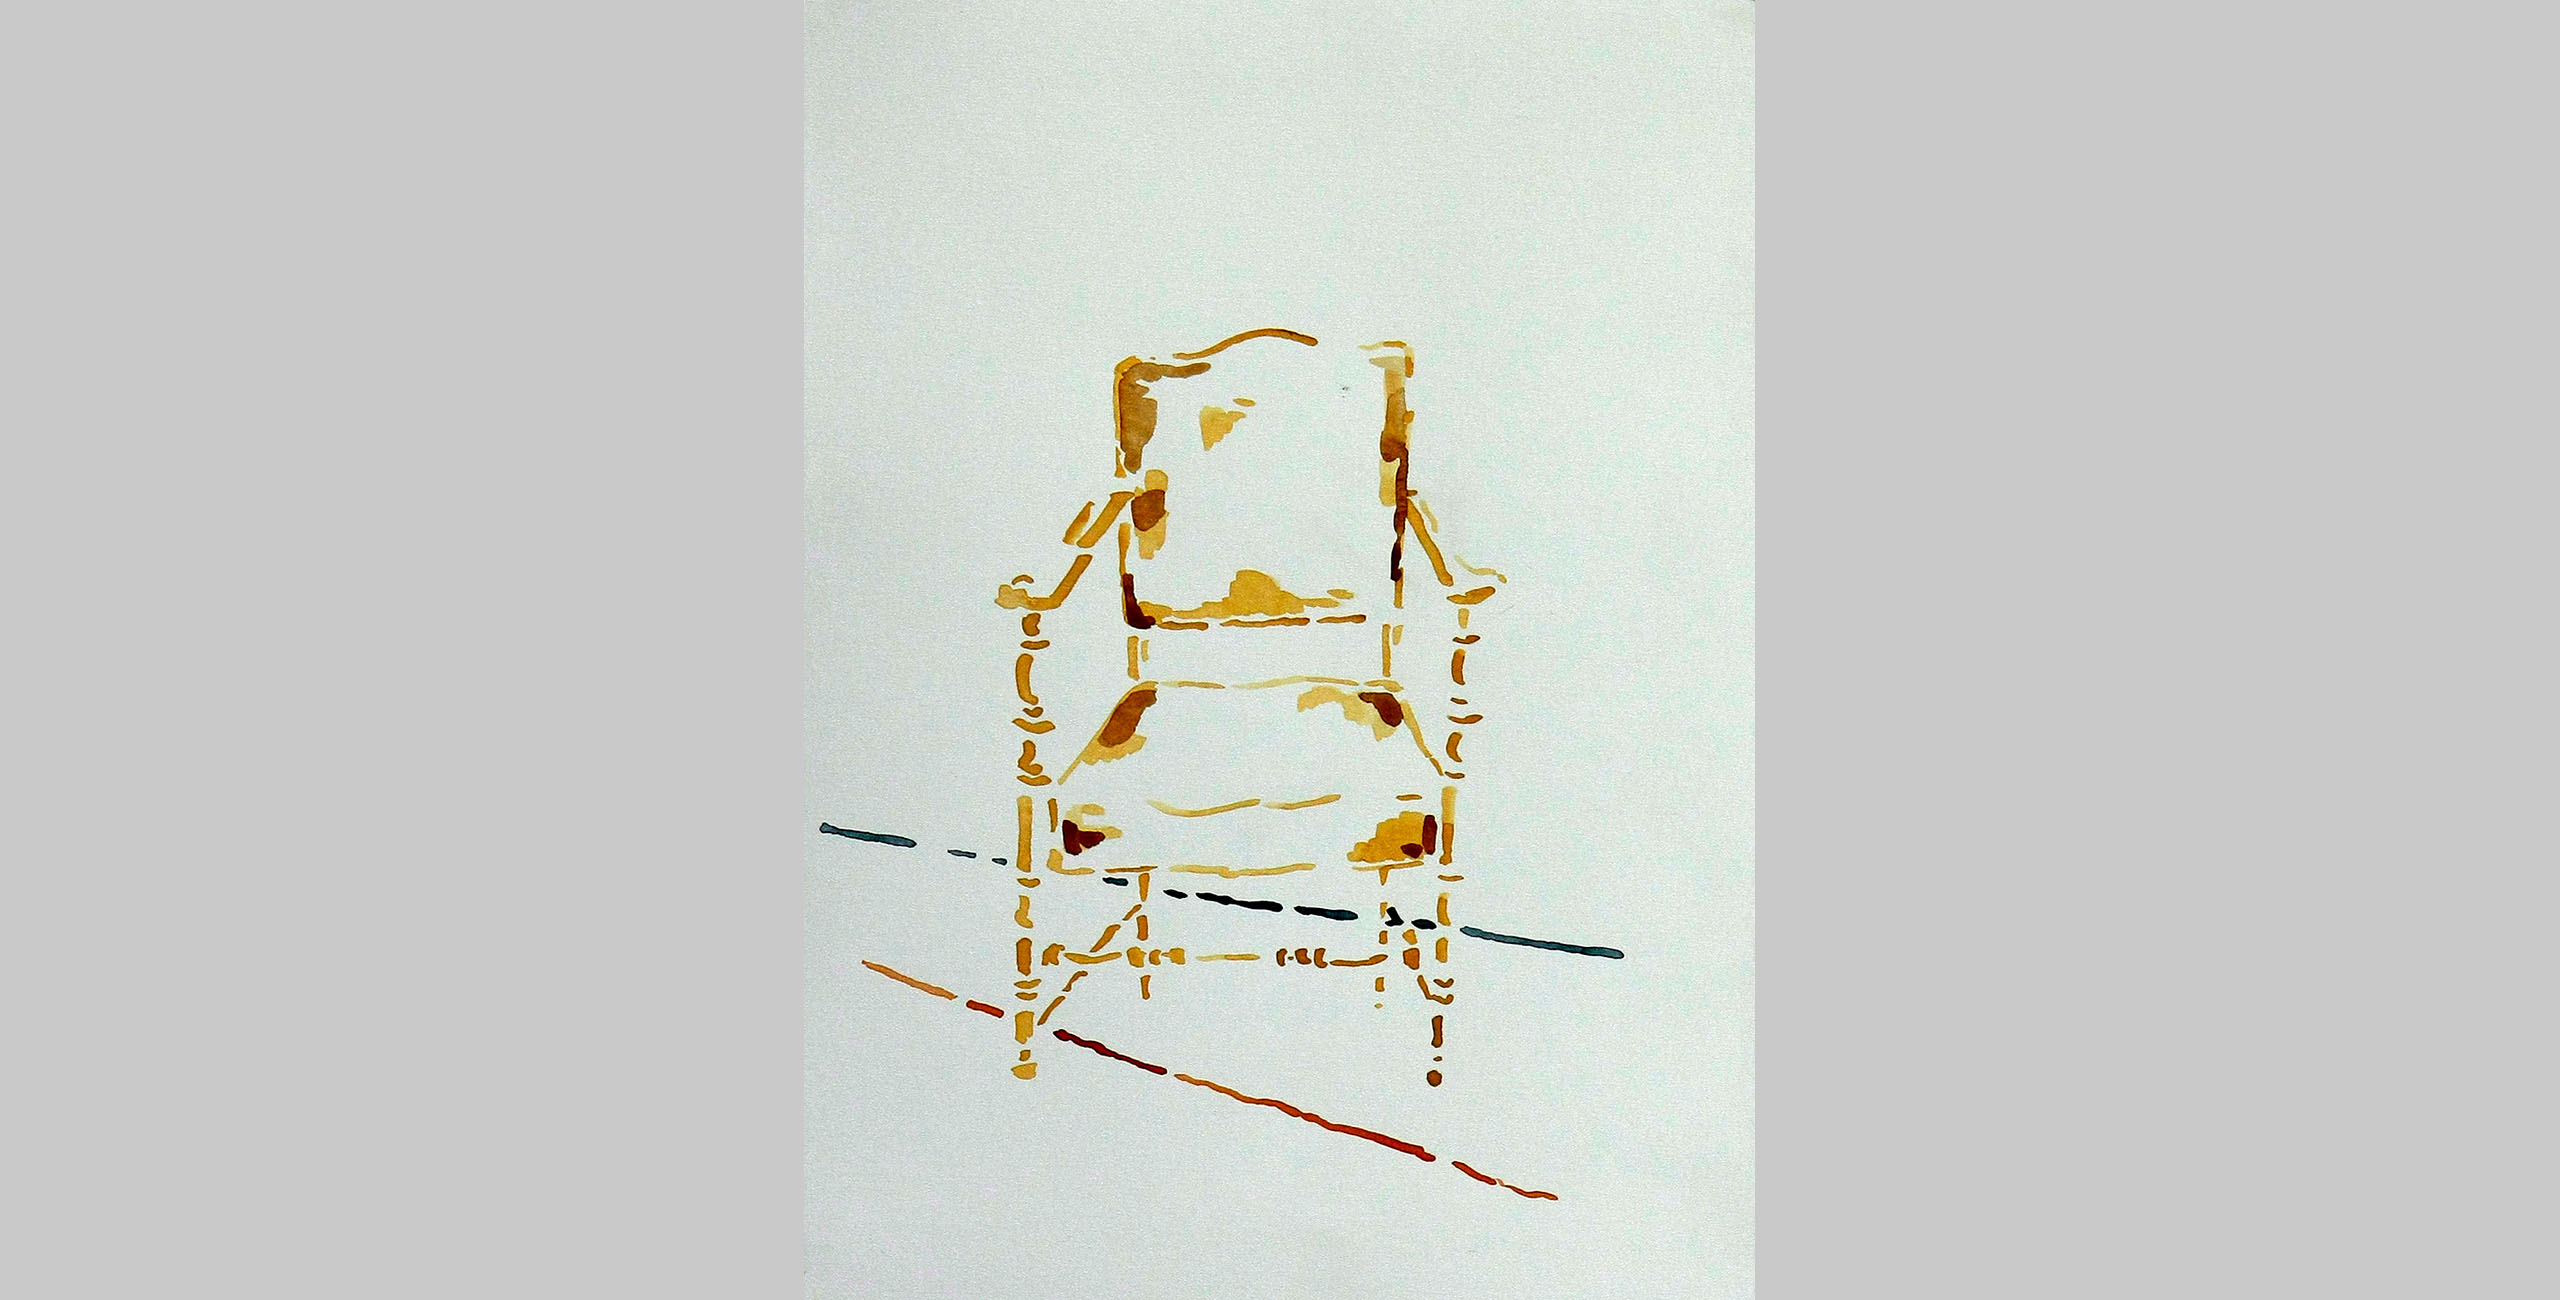 The Chair, 2011, ink on paper, 9 x 12 in.